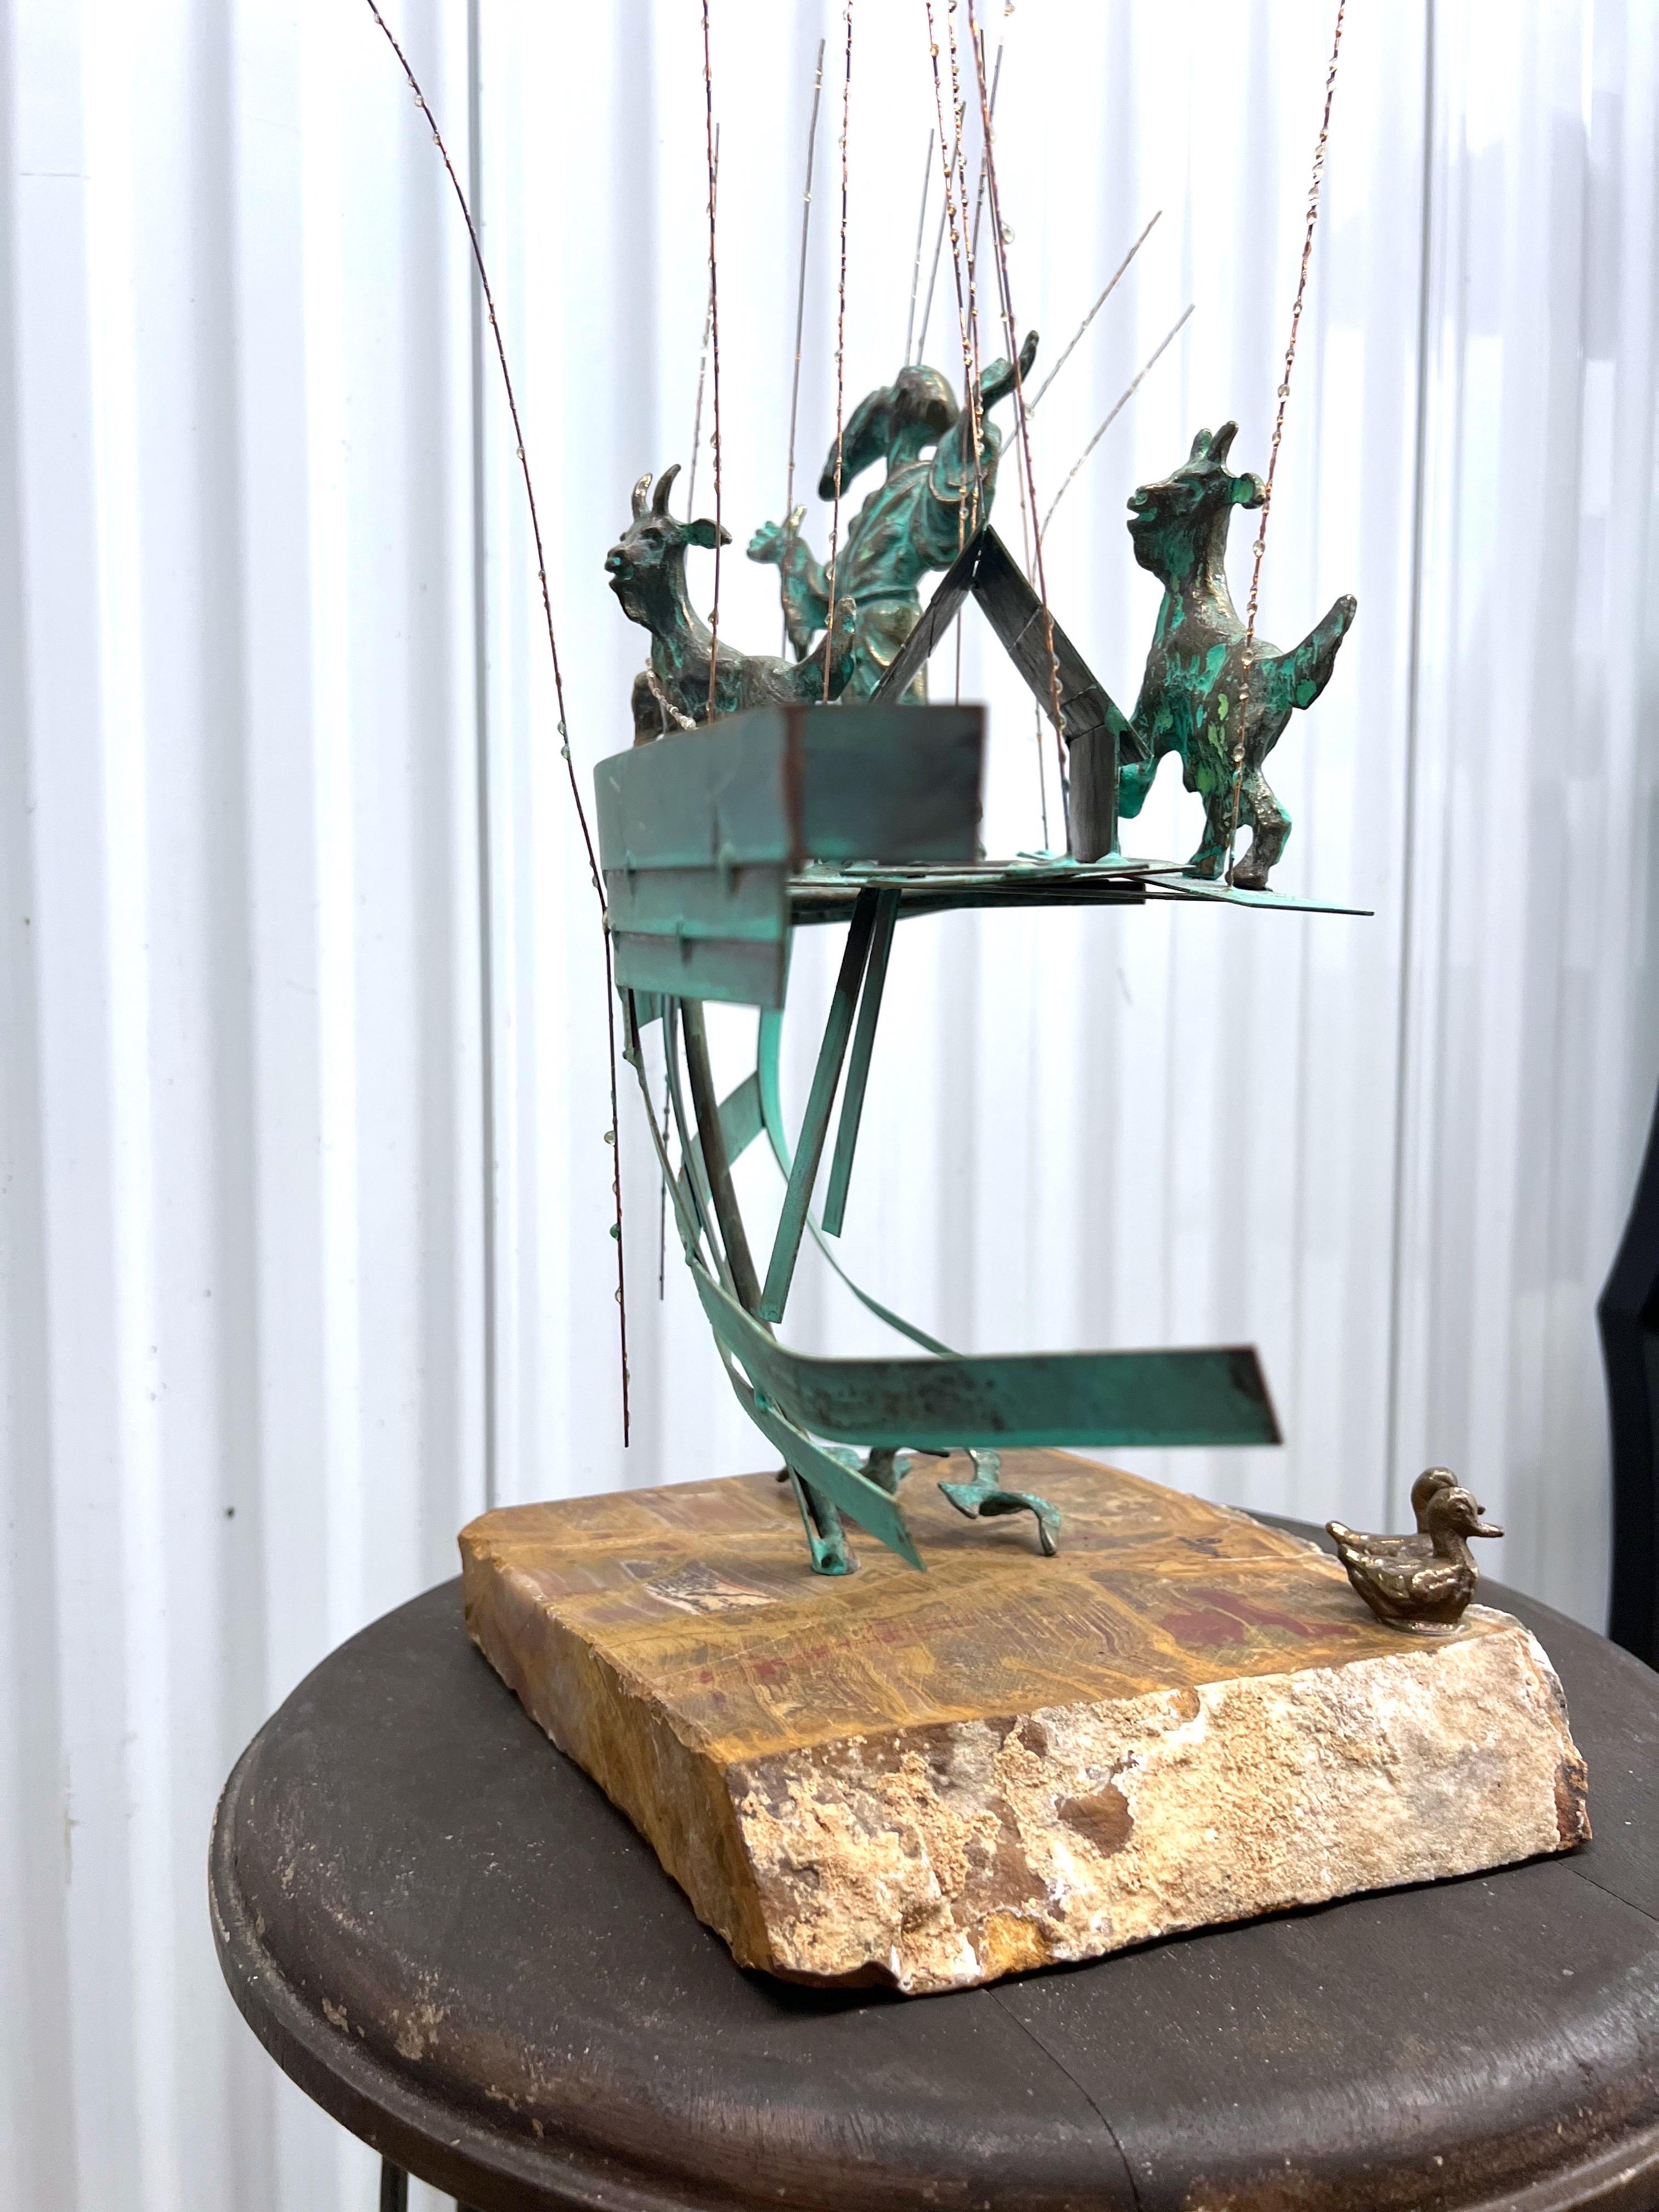 Bijan Signed Metal Art Sculpture of Man on Boat with Goats For Sale 6